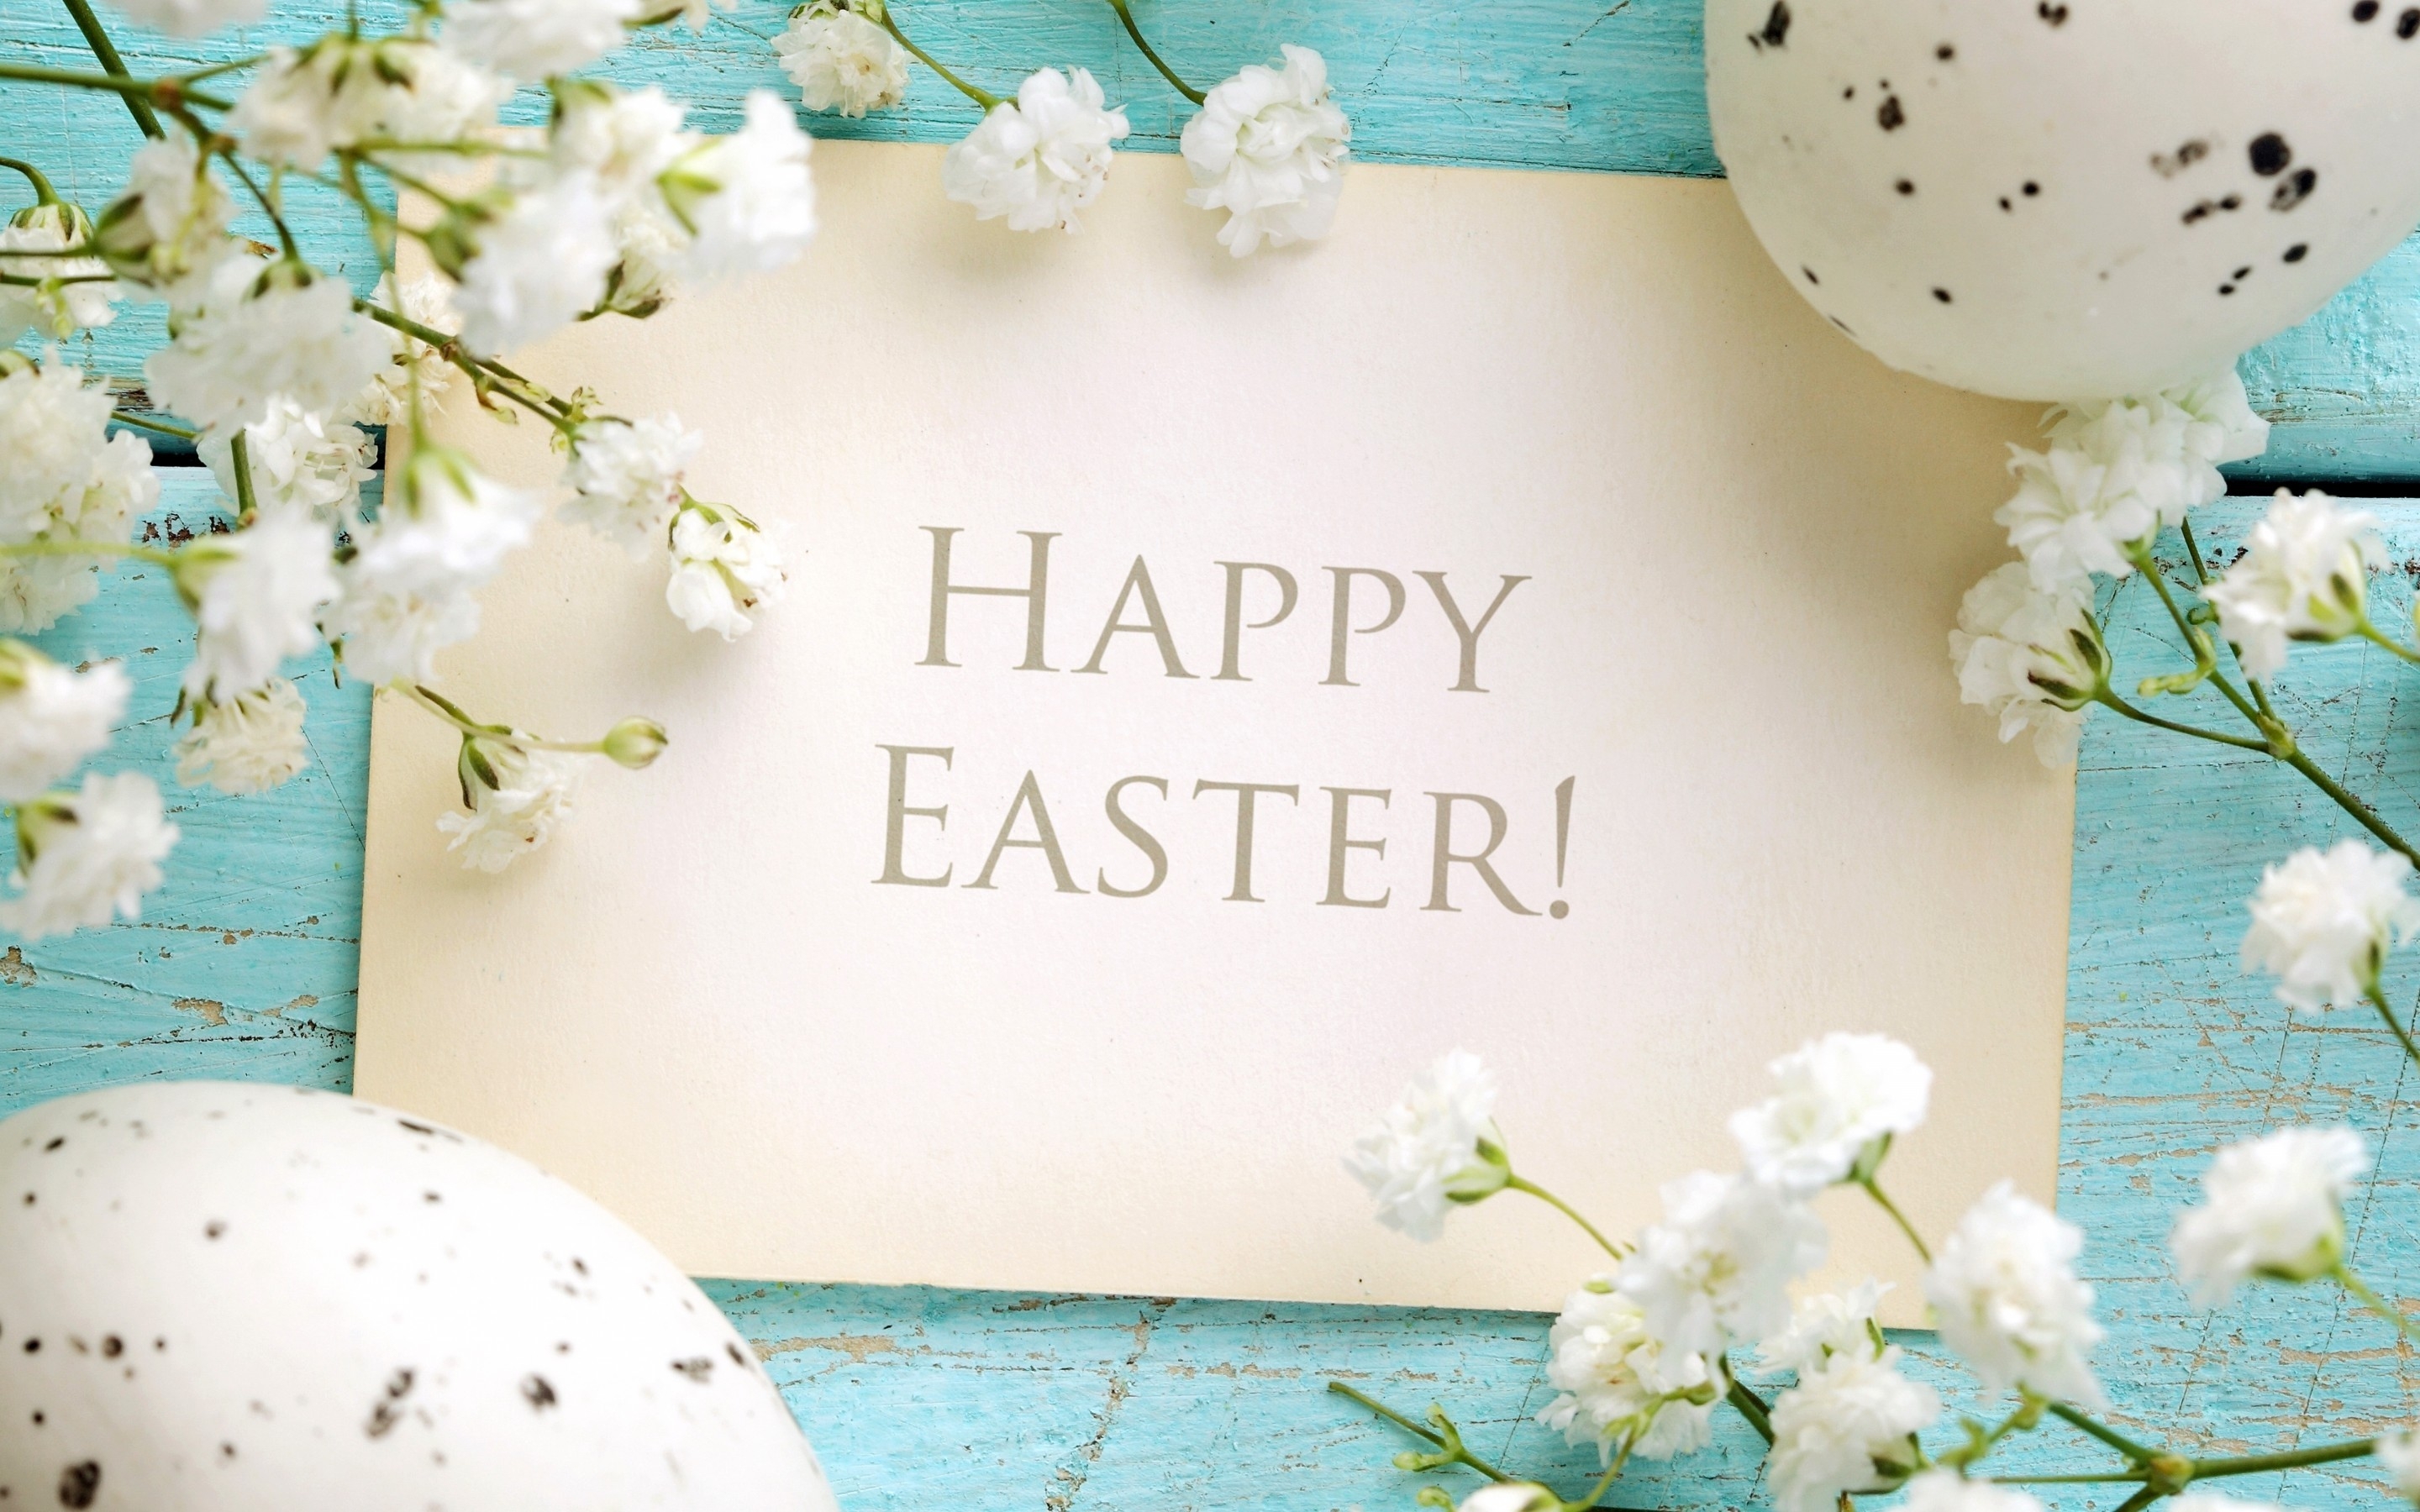 Happy Easter 2014 for 2880 x 1800 Retina Display resolution